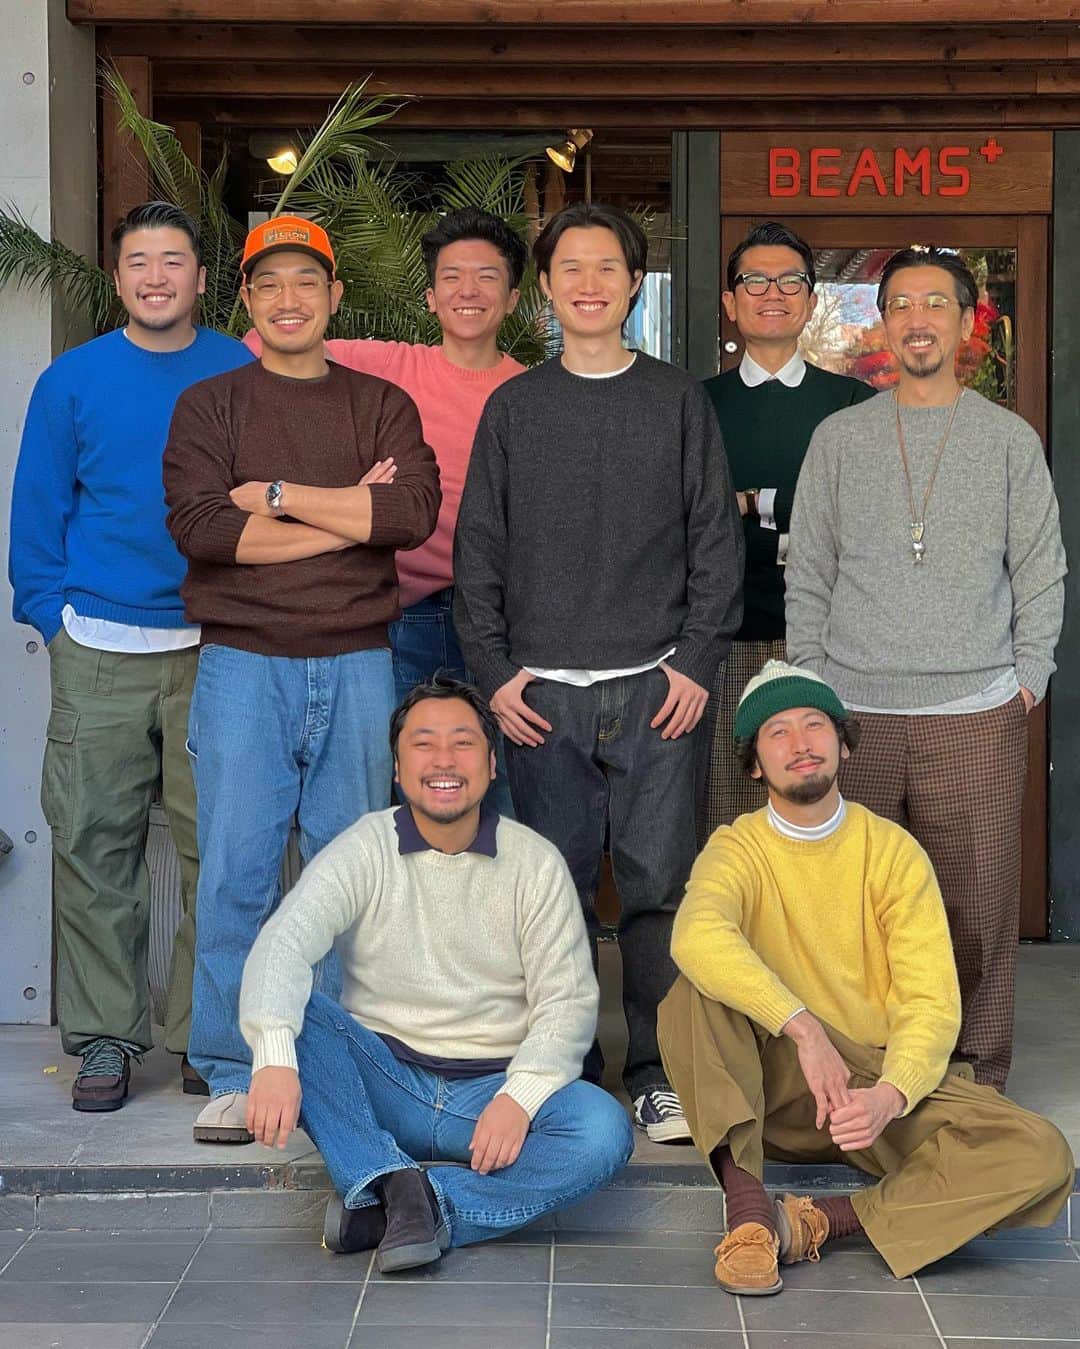 BEAMS+のインスタグラム：「・  BEAMS PLUS RECOMMEND  BEAMS PLUS  "Cashmere silk 7-gauge crew neck knit."  Store staff at BEAMS PLUS HARAJUKU wearing cashmere silk knit sweaters for coordination. The rich color variation and smooth texture are attractive. The moderate thickness makes it a good innerwear suggestion for jackets.  -------------------------------------  ビームスプラス原宿のショップスタッフが、カシミヤシルクのニットセーターを着てコーディネート。豊富なカラーバリエーションと滑らかな肌触りが魅力的。程良い厚みでジャケットのインナーにも提案しています。   #beams #beamsplus #beamsplusharajuku  #mensfashion #cashmere #cashmeresweater」